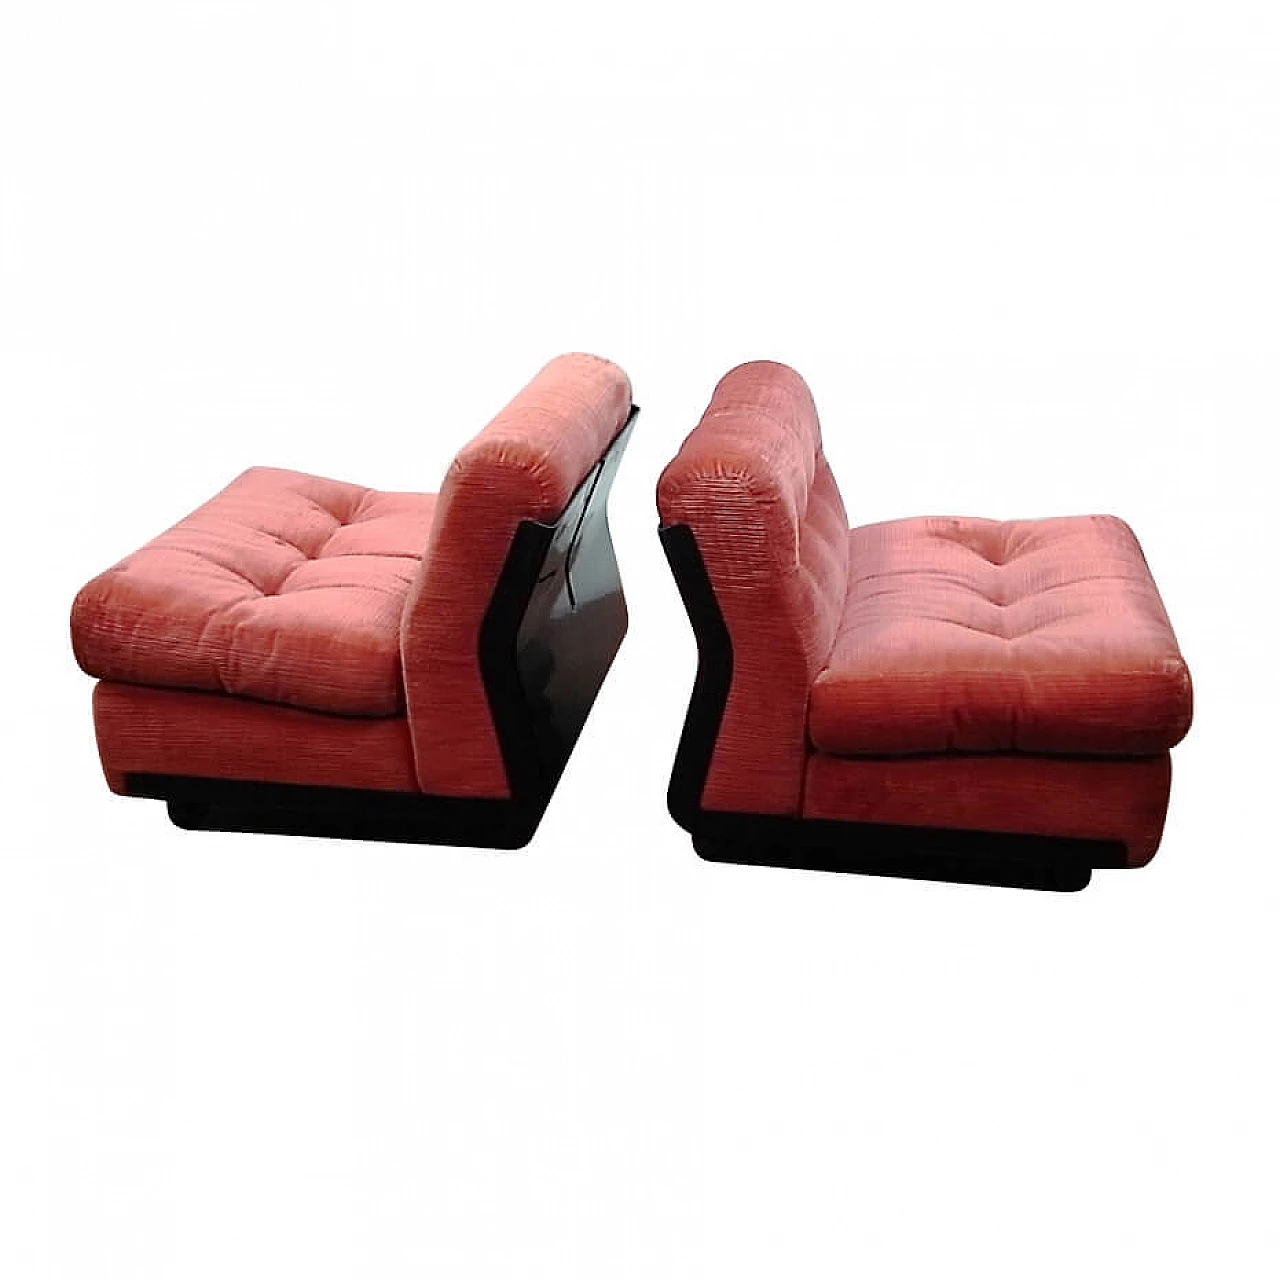 Pair of Amanta armchairs by Mario Bellini for B&B, 1970s 1199182